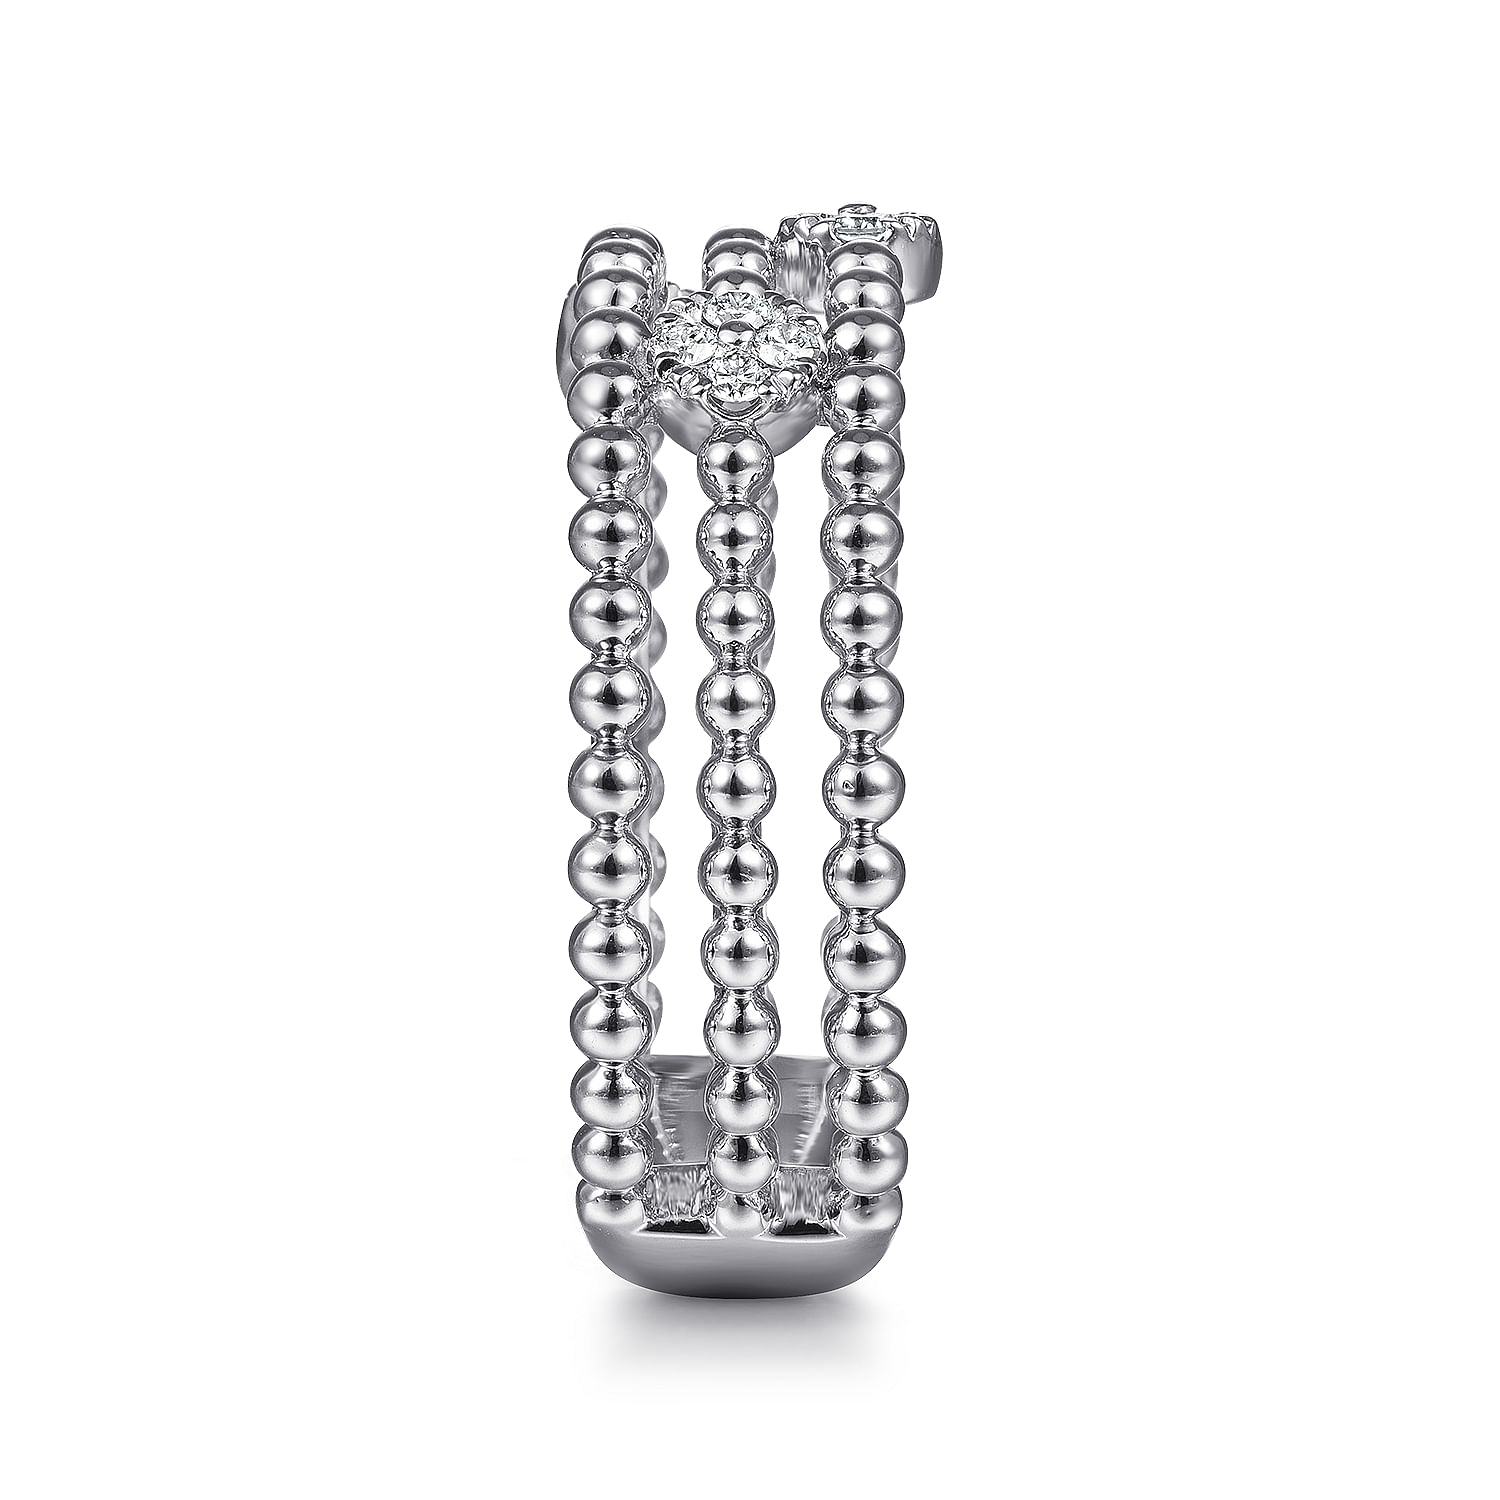 14K White Gold Three Row Beaded Ring with Pavé Diamond Cluster Stations